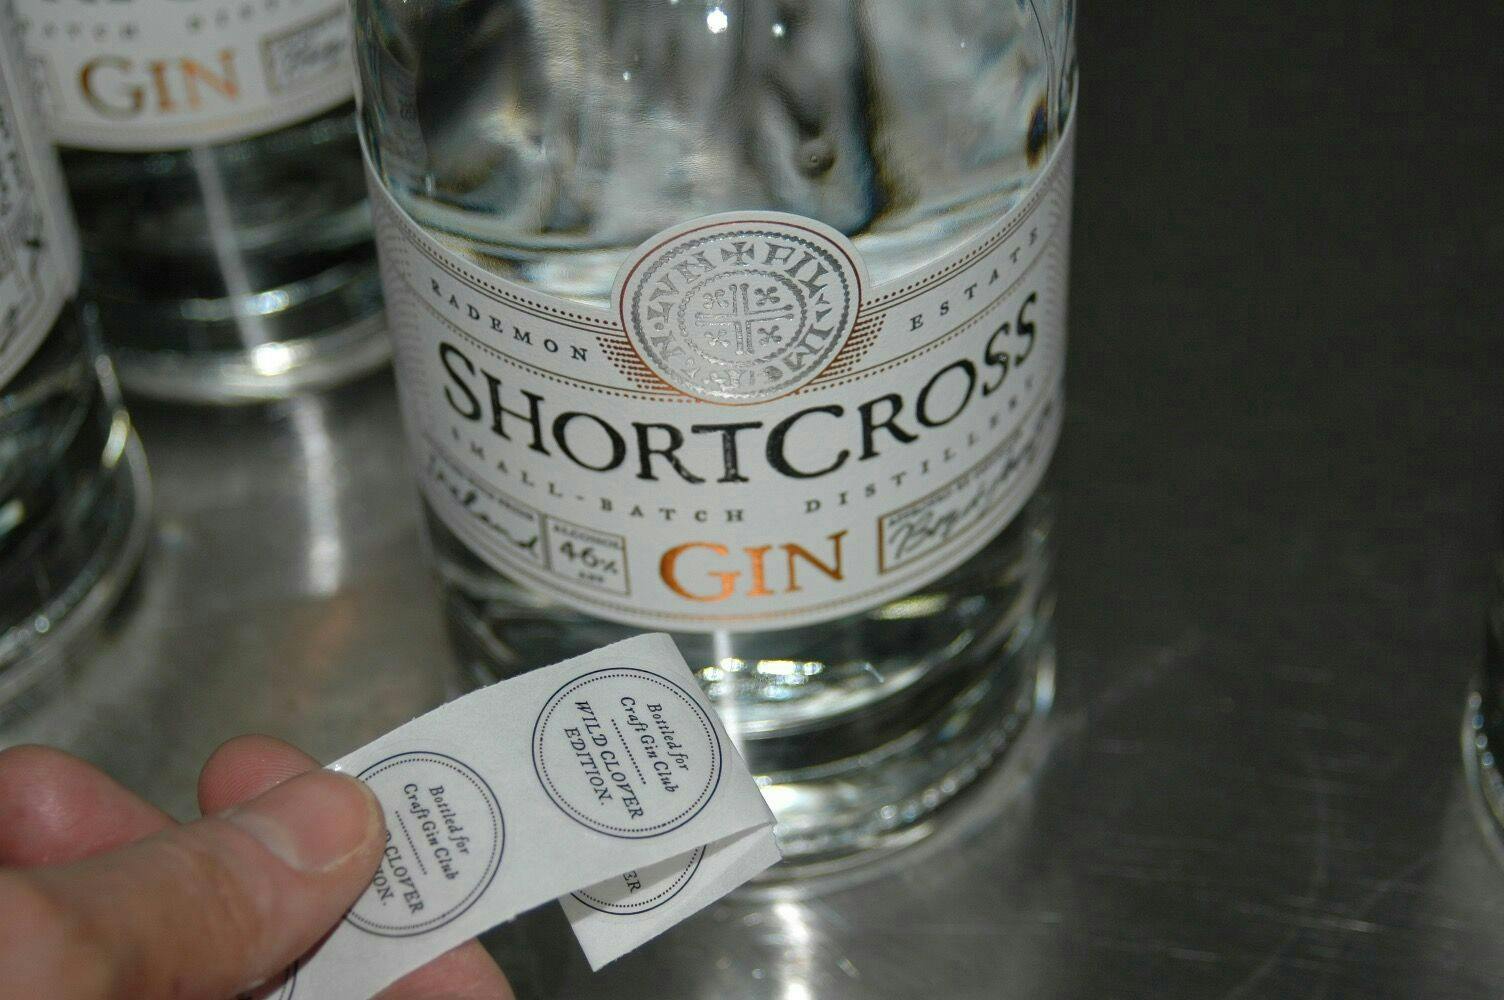 March Gin of the Month: Shortcross Gin - Wild Clover Special Edition